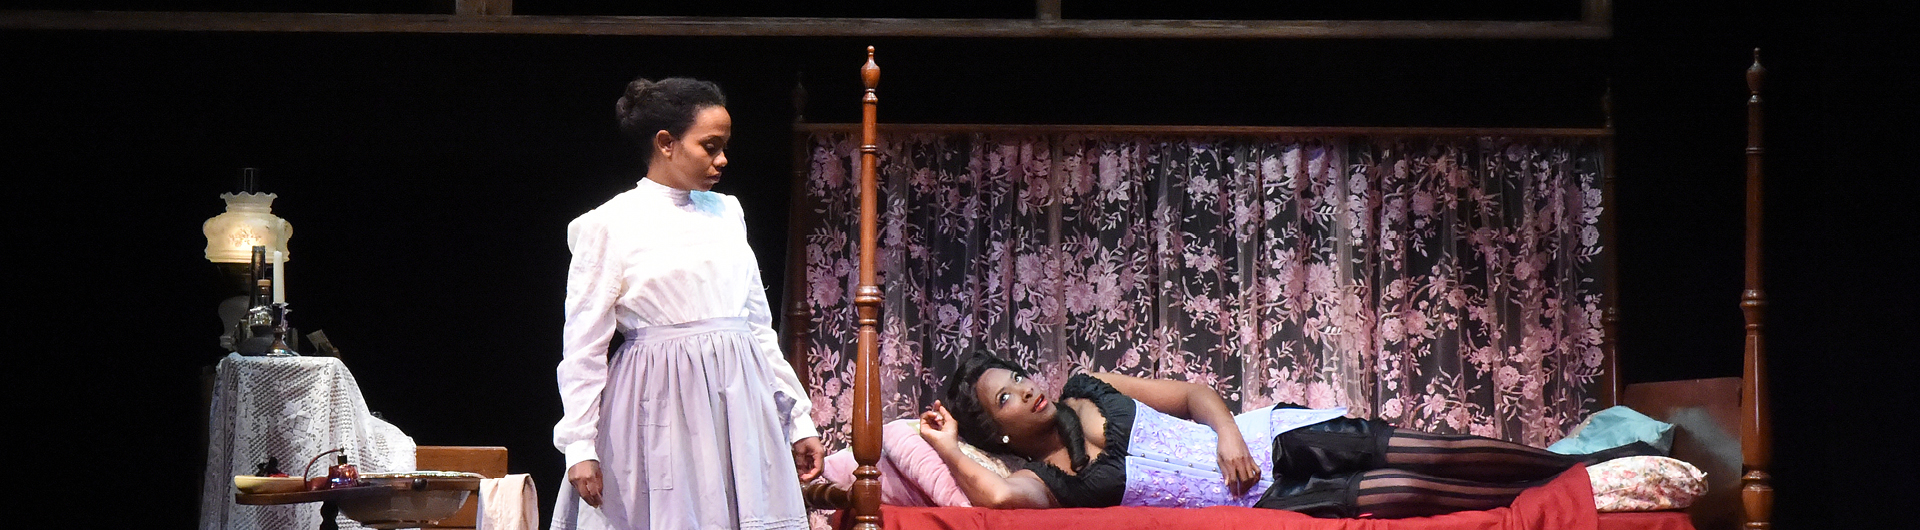 Theatre Review: 'Intimate Apparel' at Silver Spring Stage